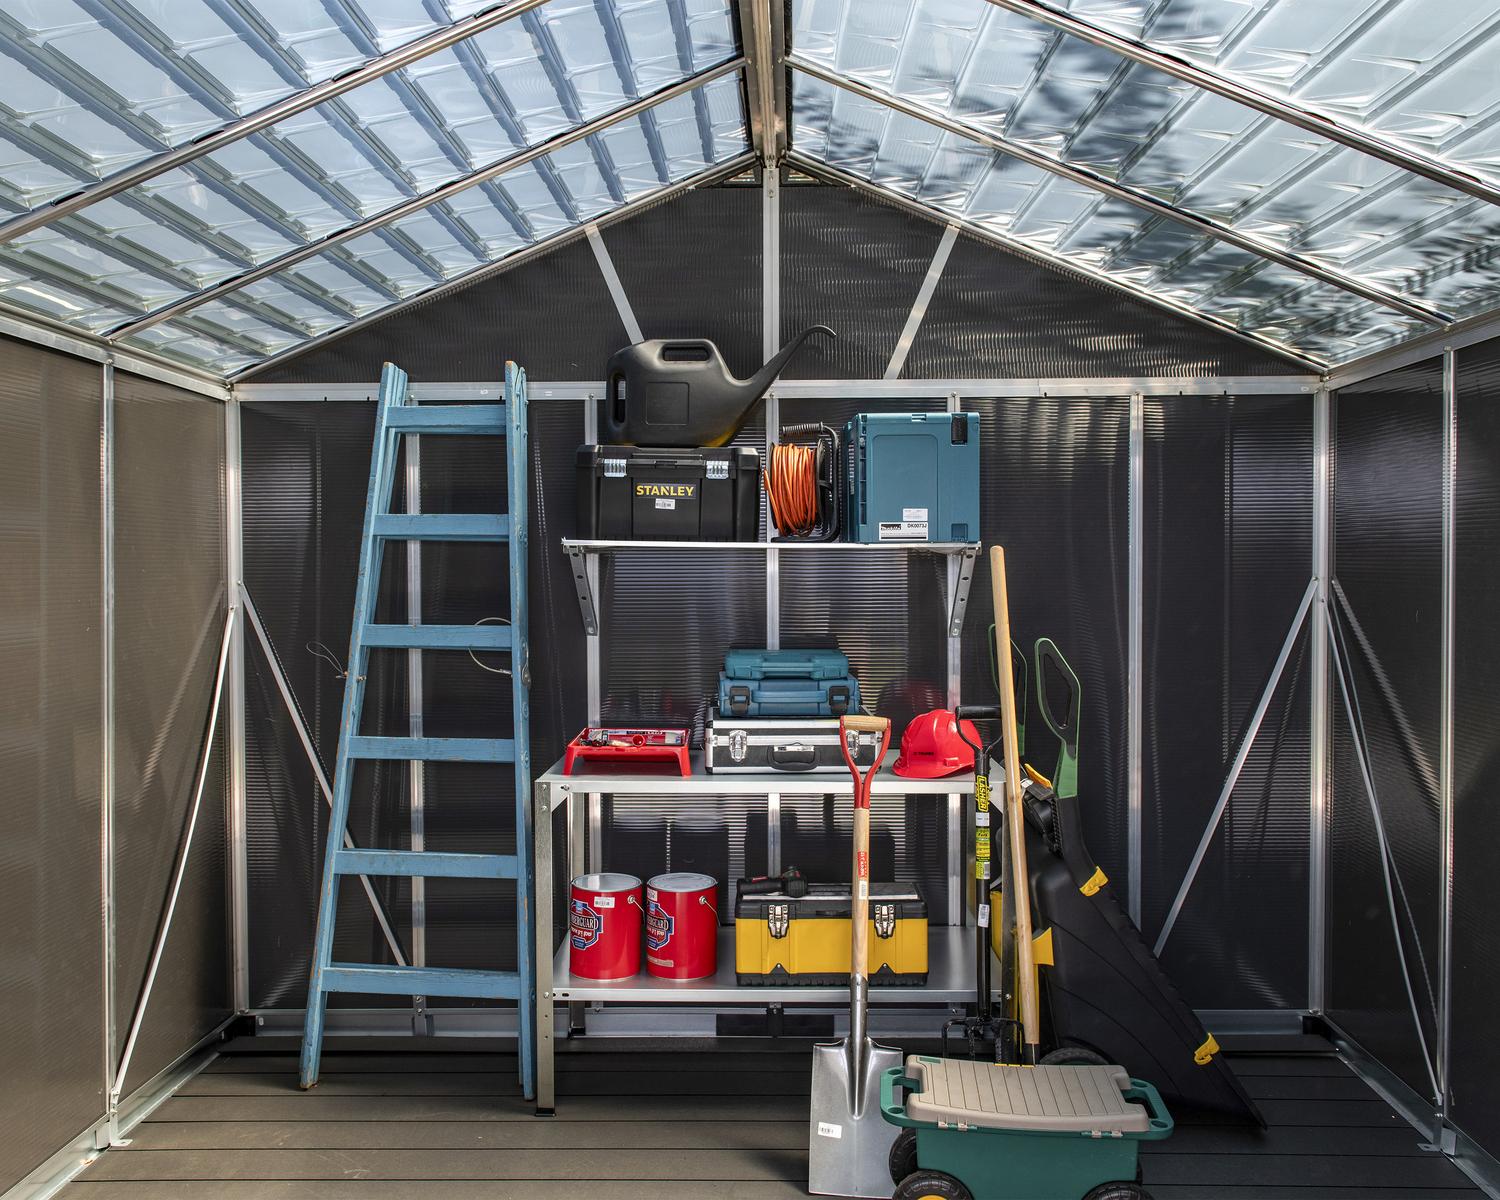 organizing of tools in a large storage shed with a skylight roof